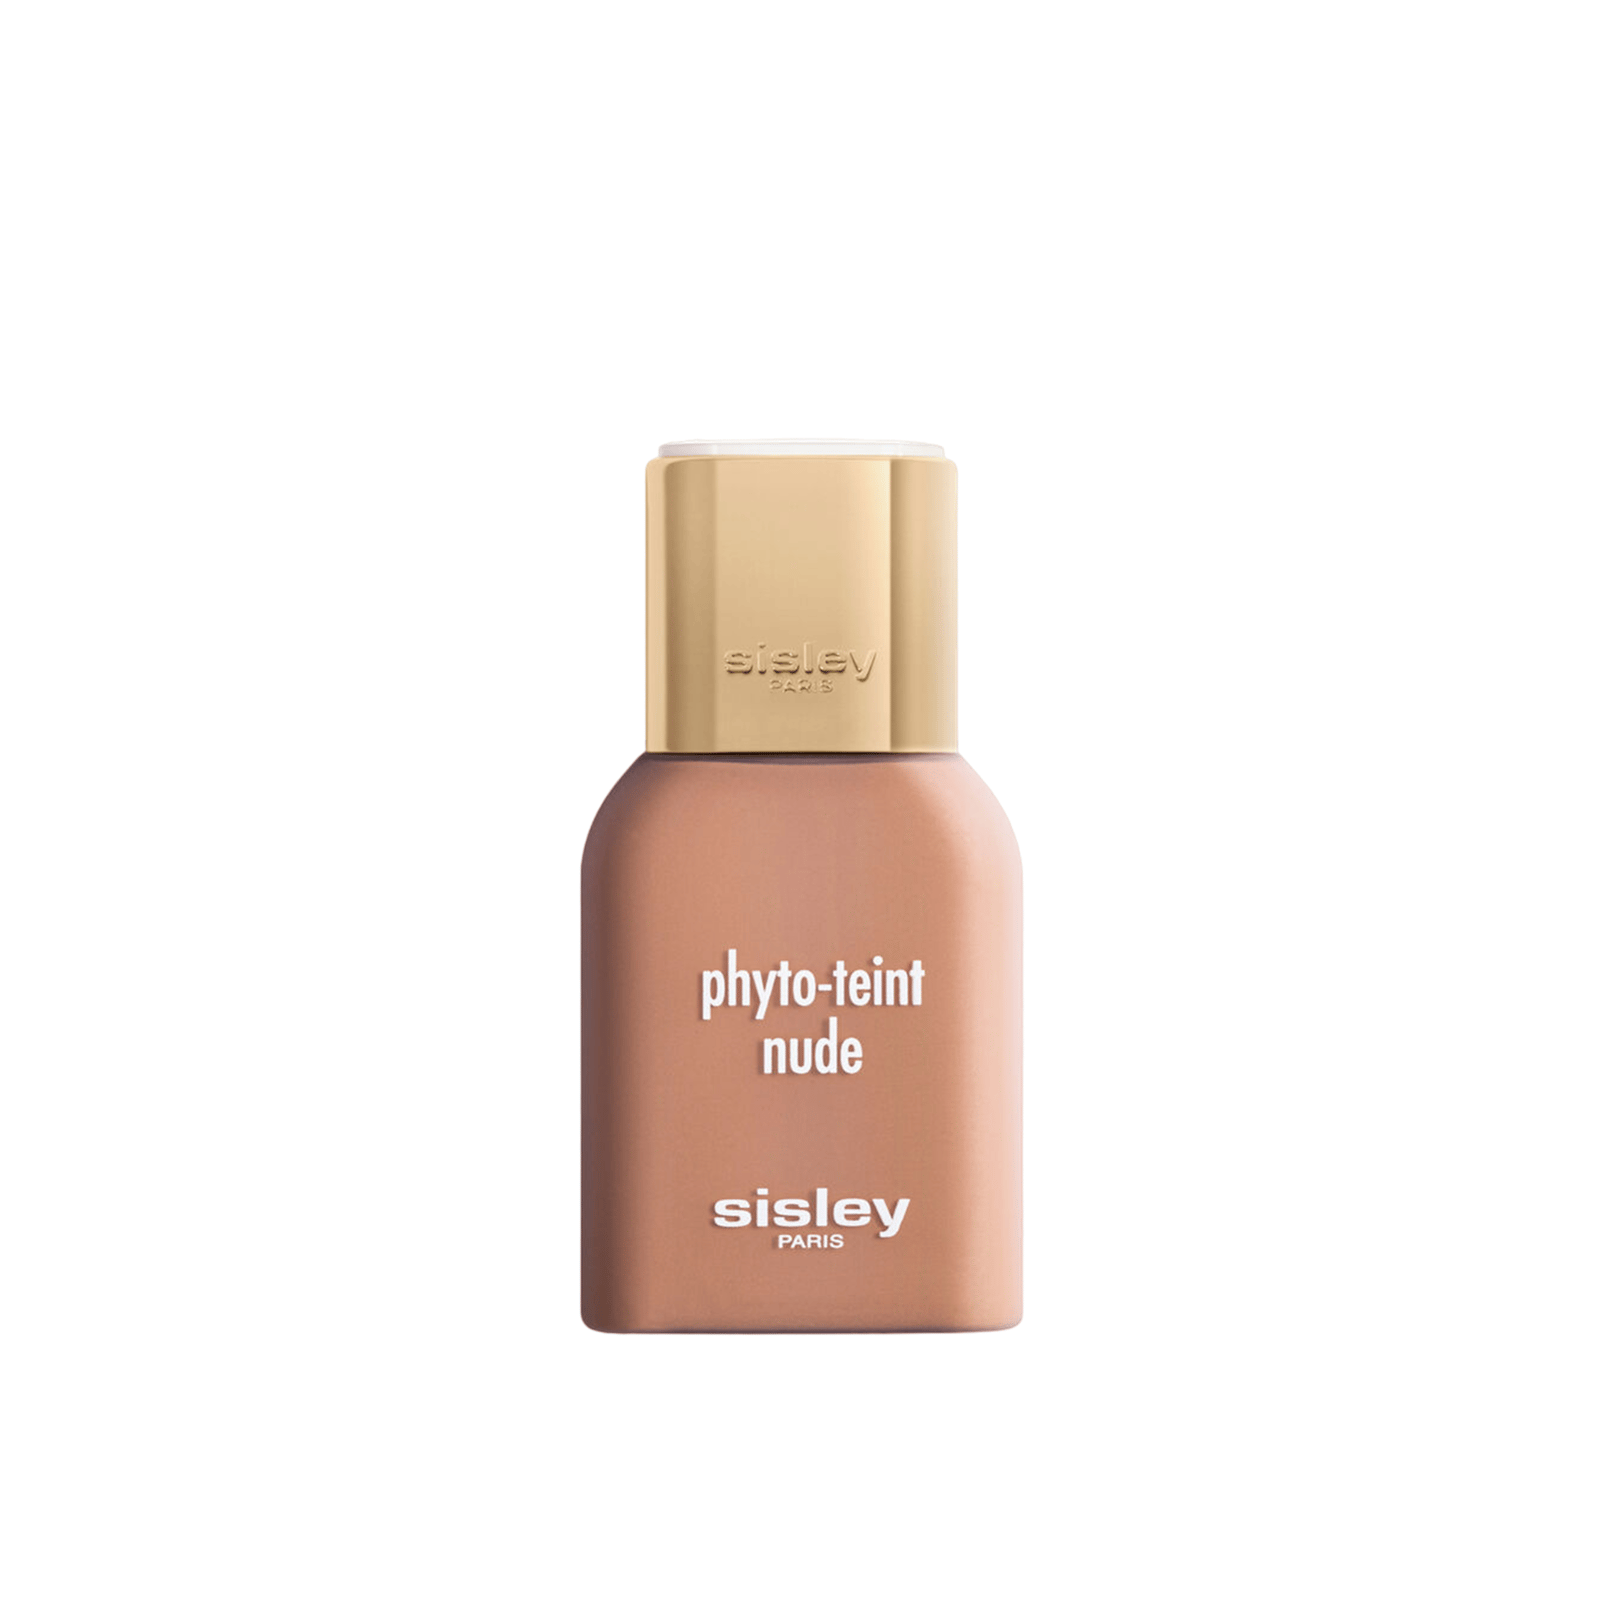 Sisley Paris Phyto-Teint Nude Water Infused Second Skin Foundation 5C Golden 30ml (1 fl oz)